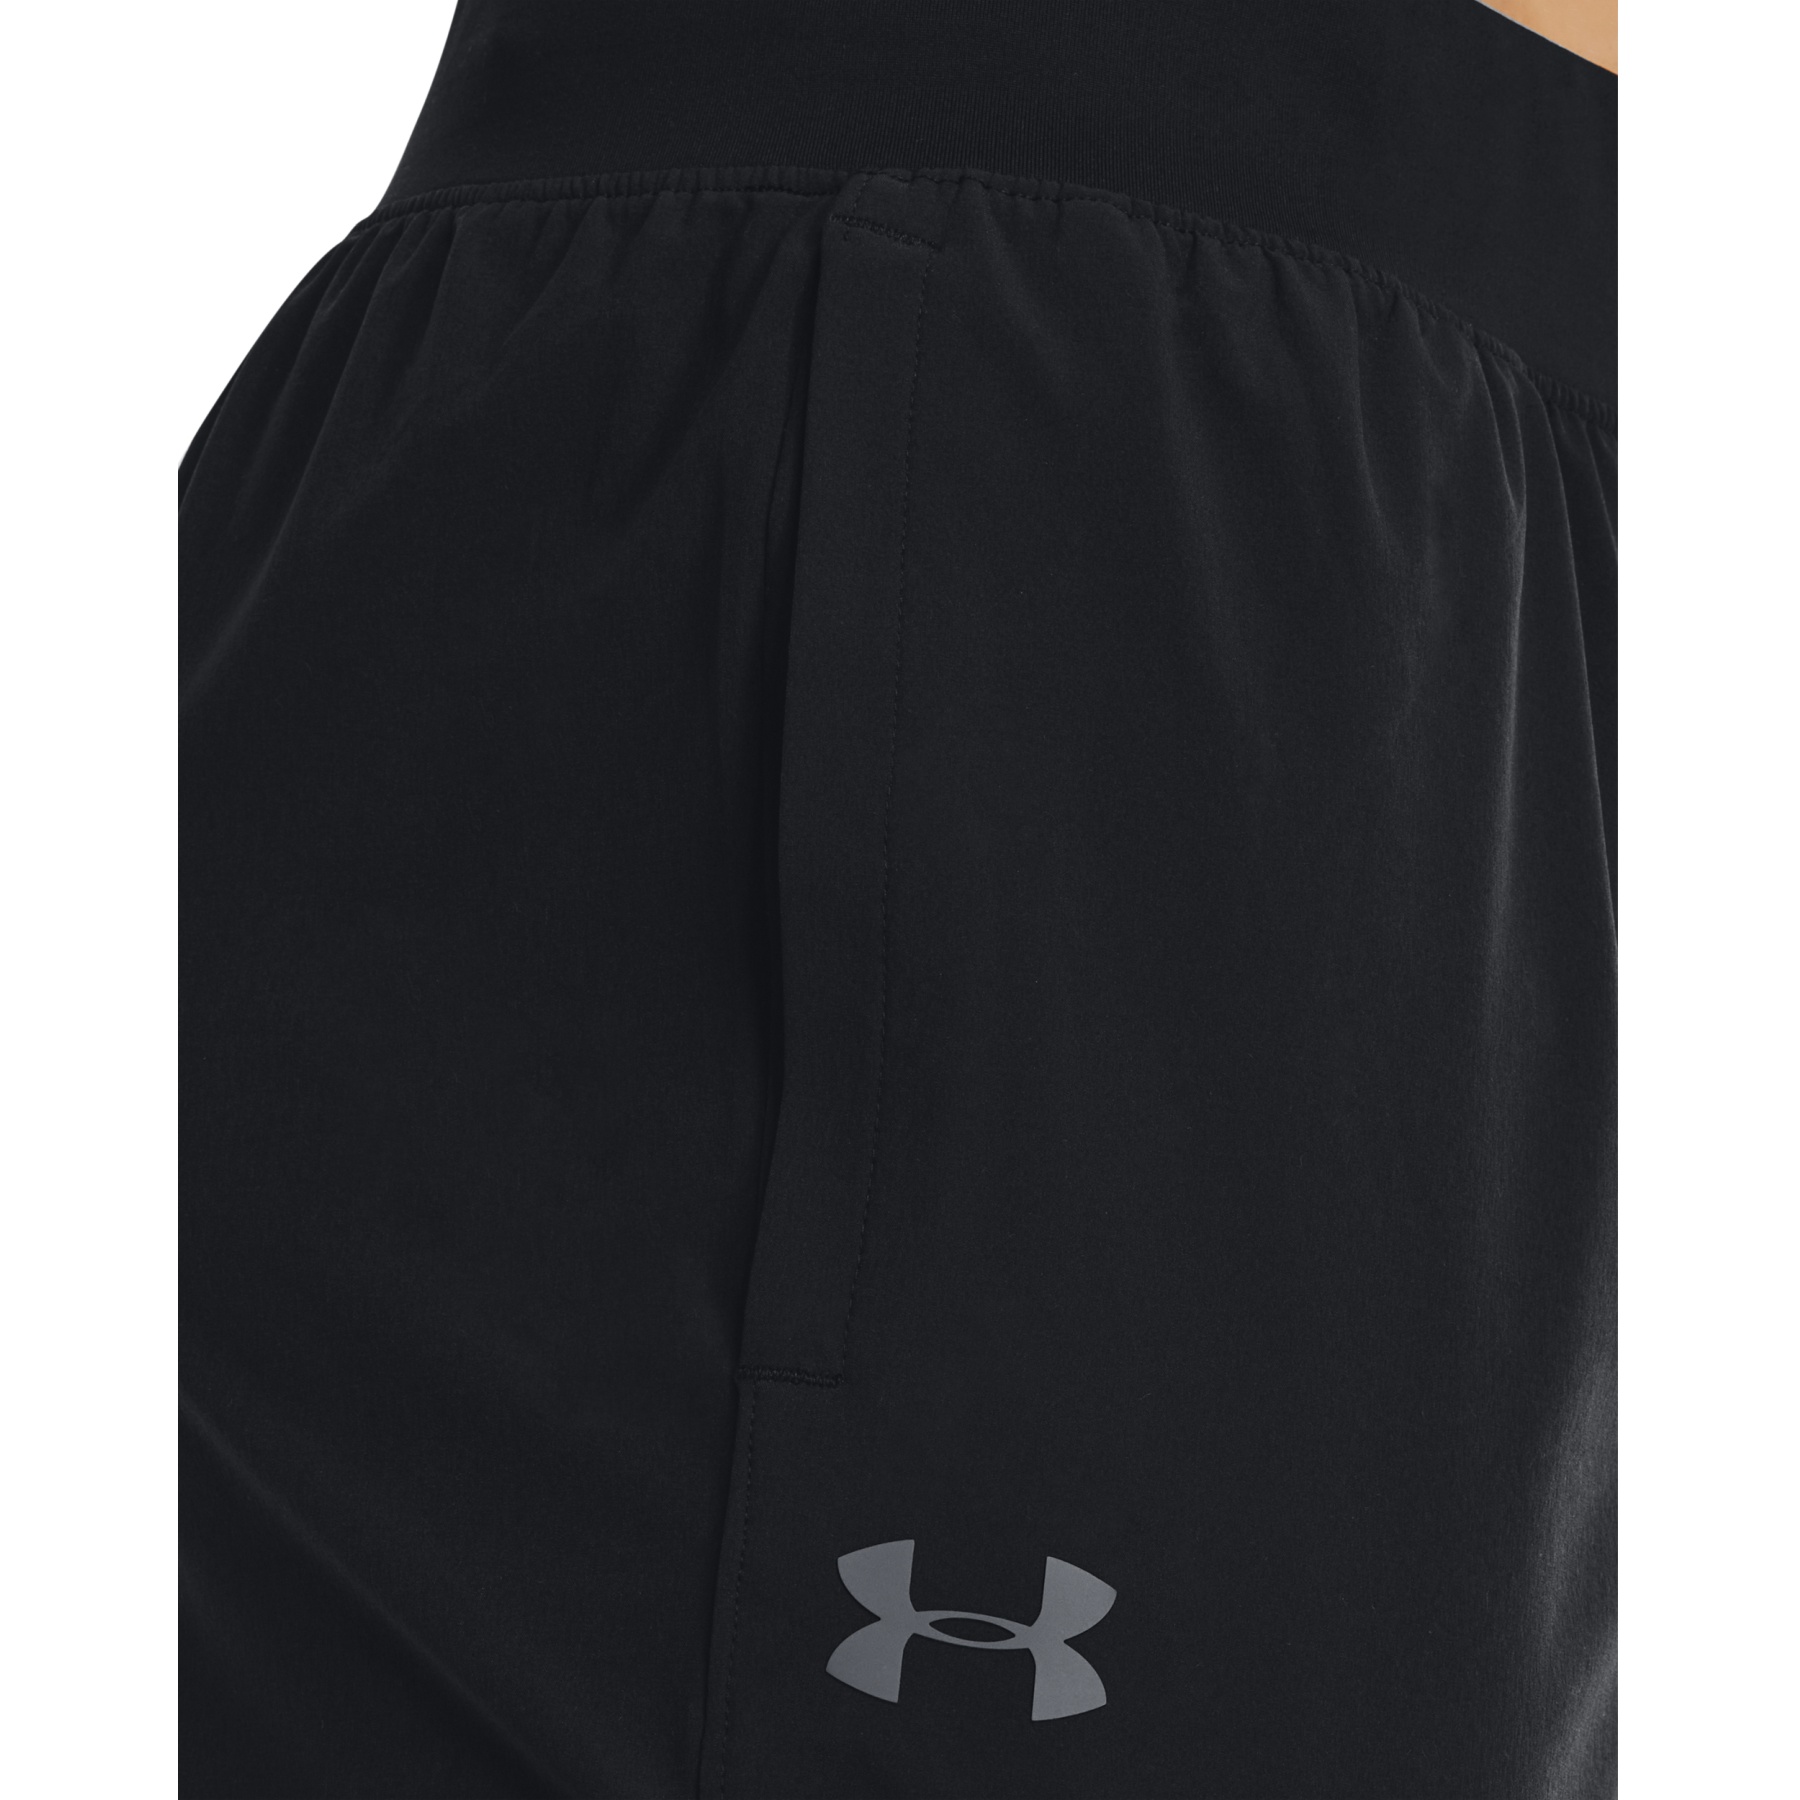 Under Armour Pants Stretch Woven Pant Black - Hockey Store